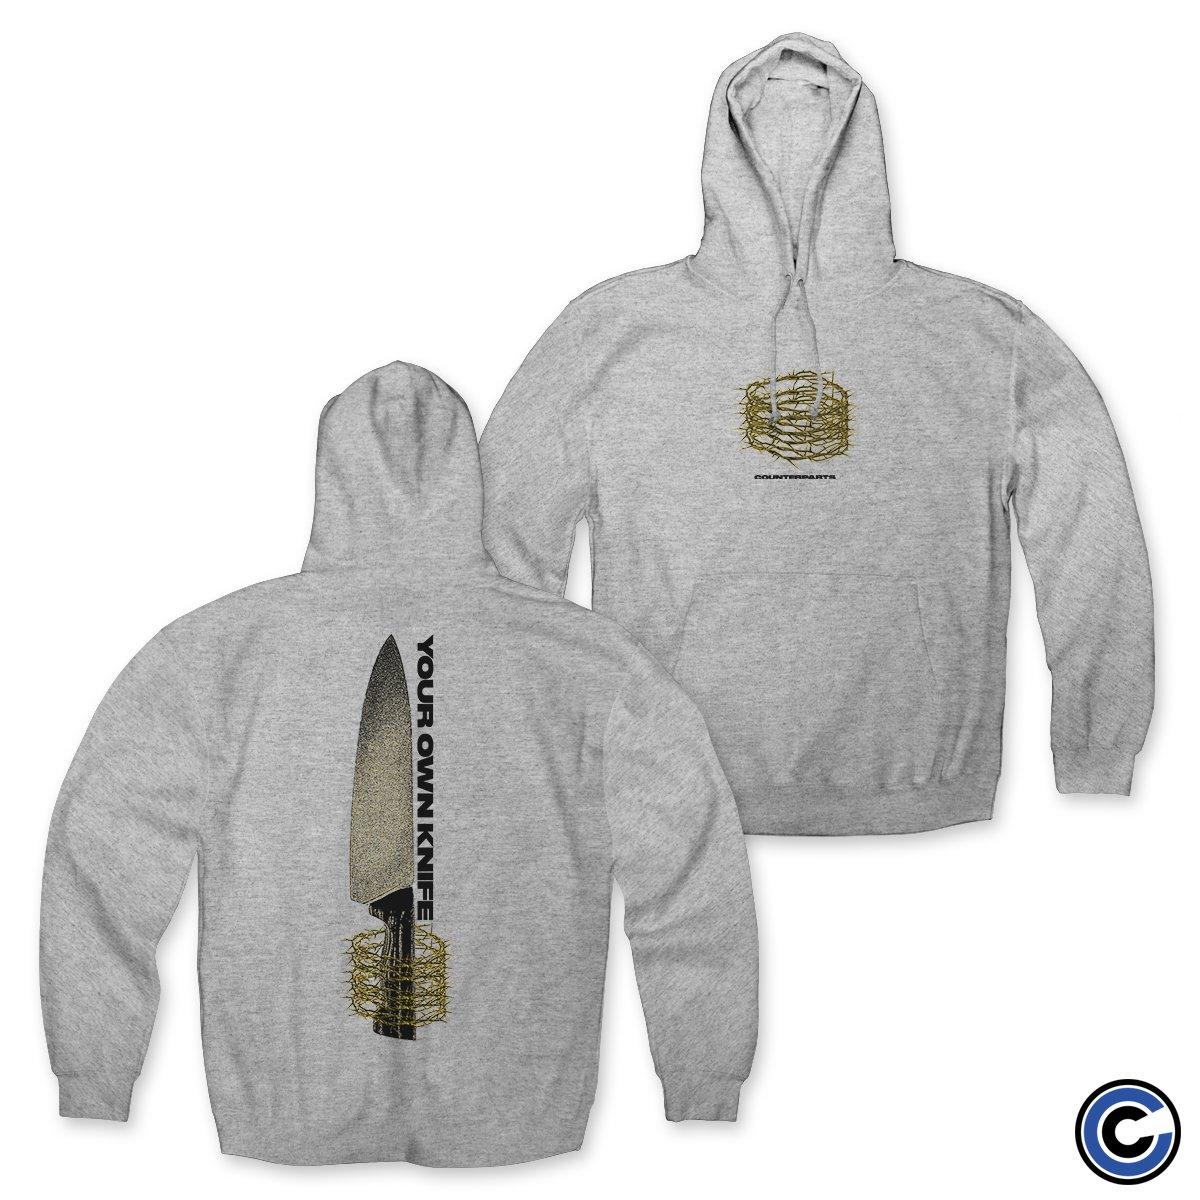 Buy – Counterparts "Knife" Hoodie – Band & Music Merch – Cold Cuts Merch